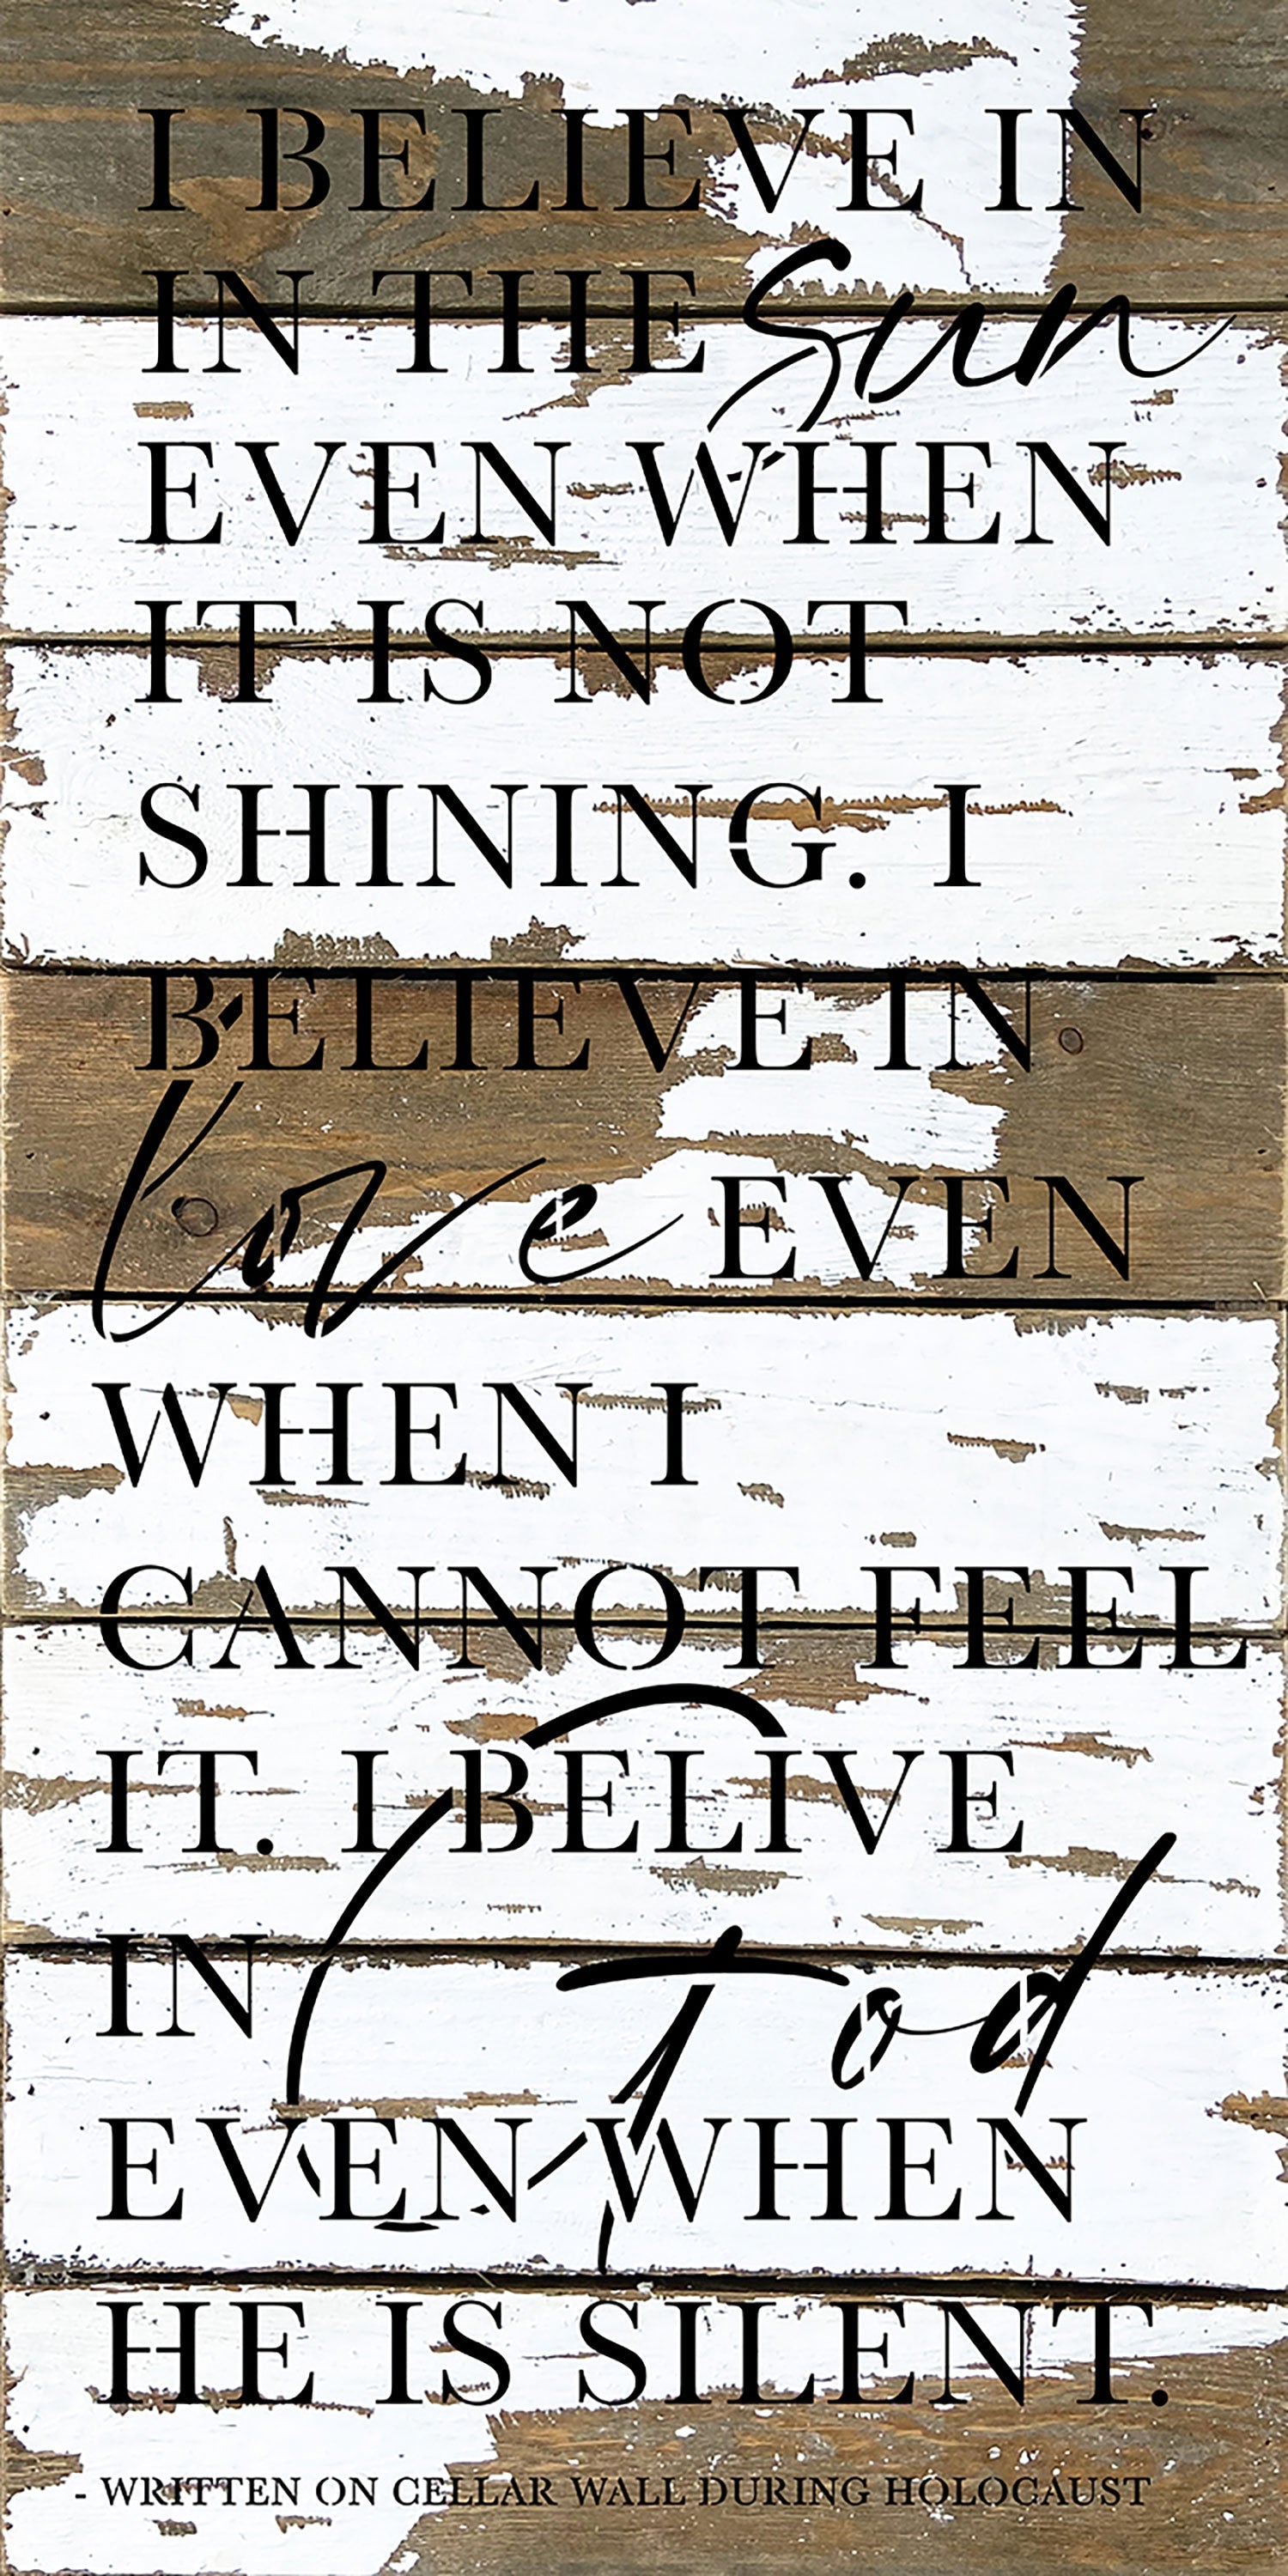 I believe in the sun even when it is not shining. I believe in love even when I cannot see it. I believe in God when in he is silent / 12x24 Reclaimed Wood Wall Decor Sign